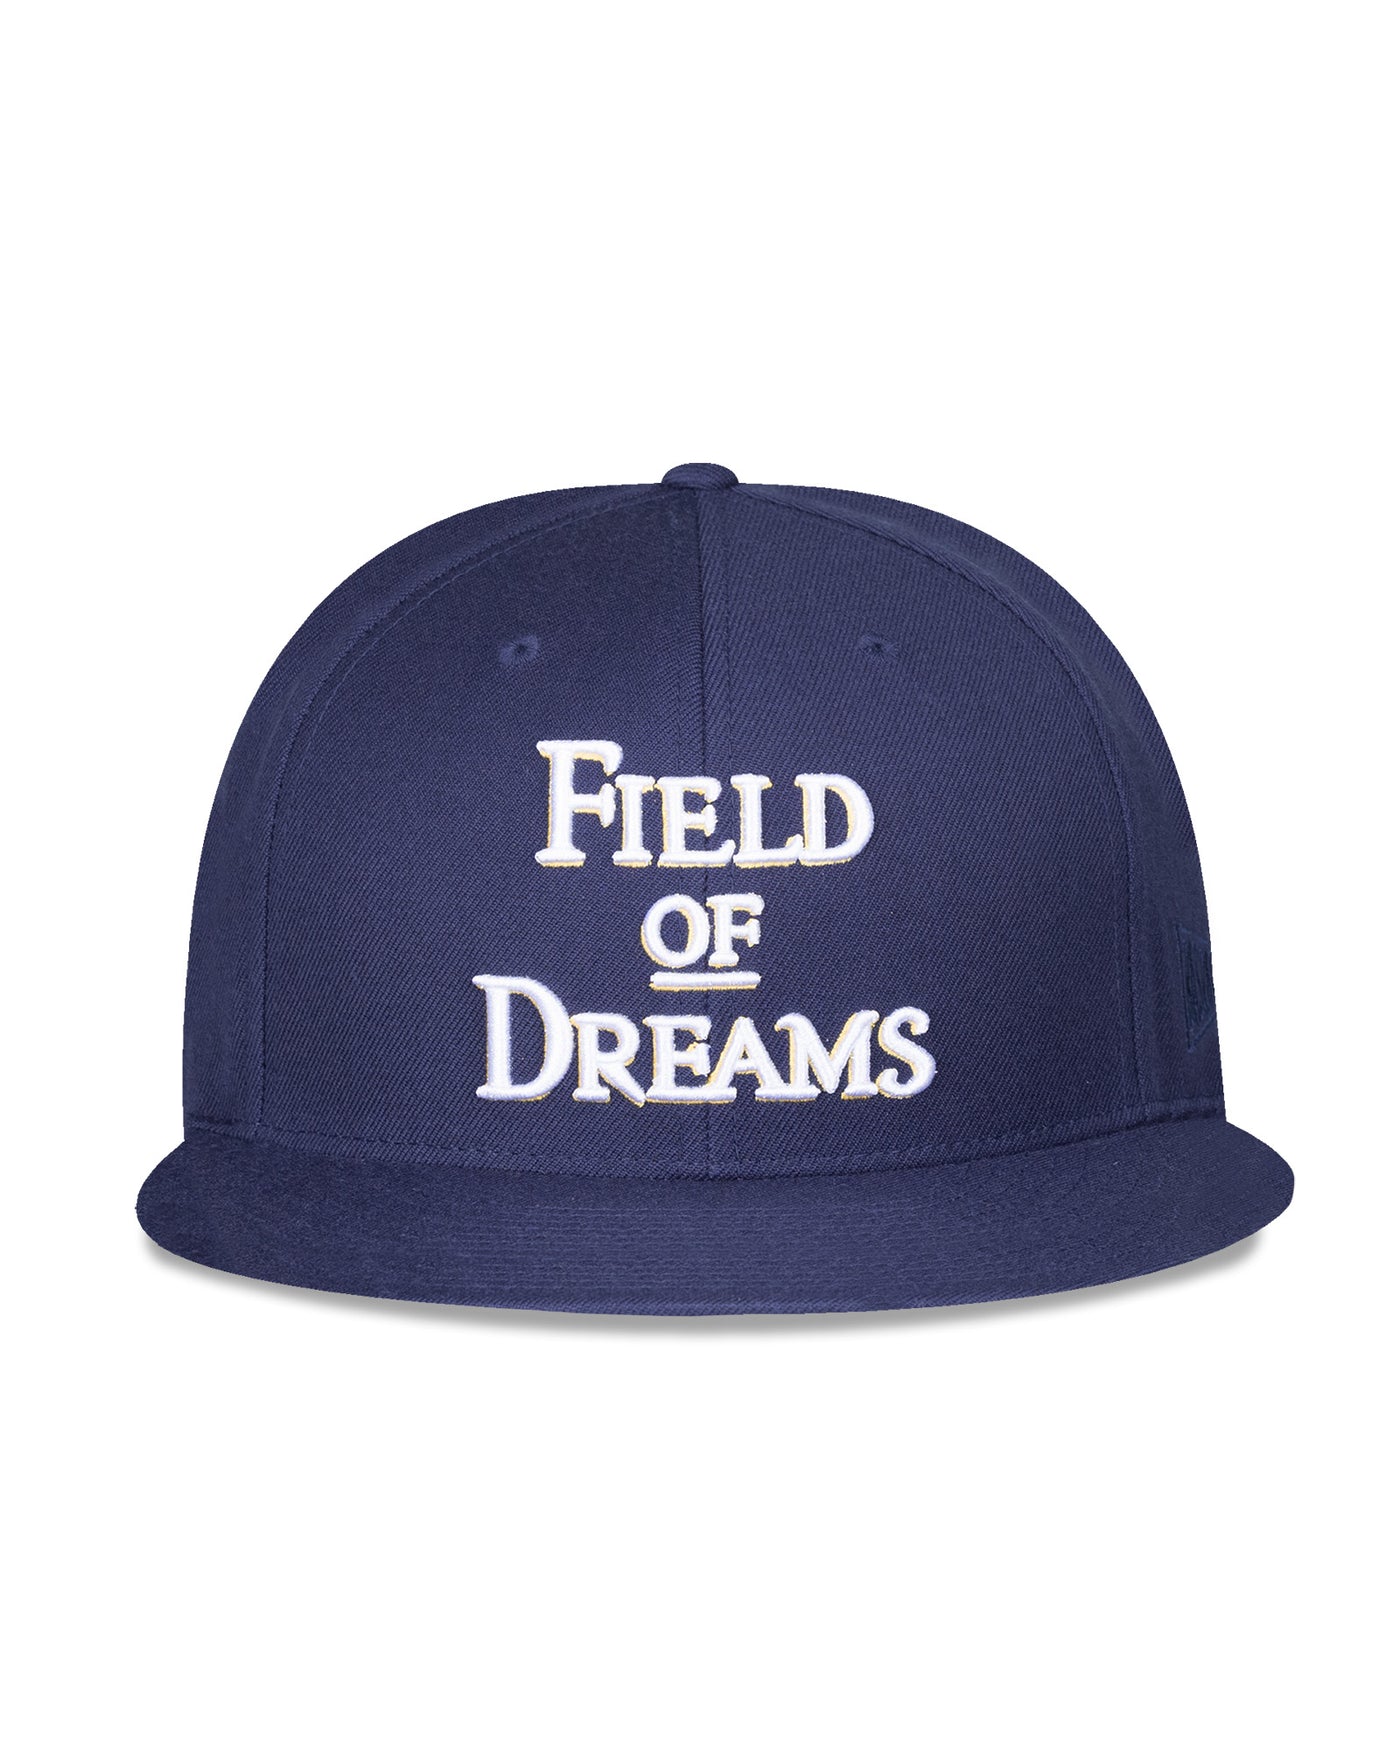 Battery Bundle - Field of Dreams This Field Pack: Snapback and Tee